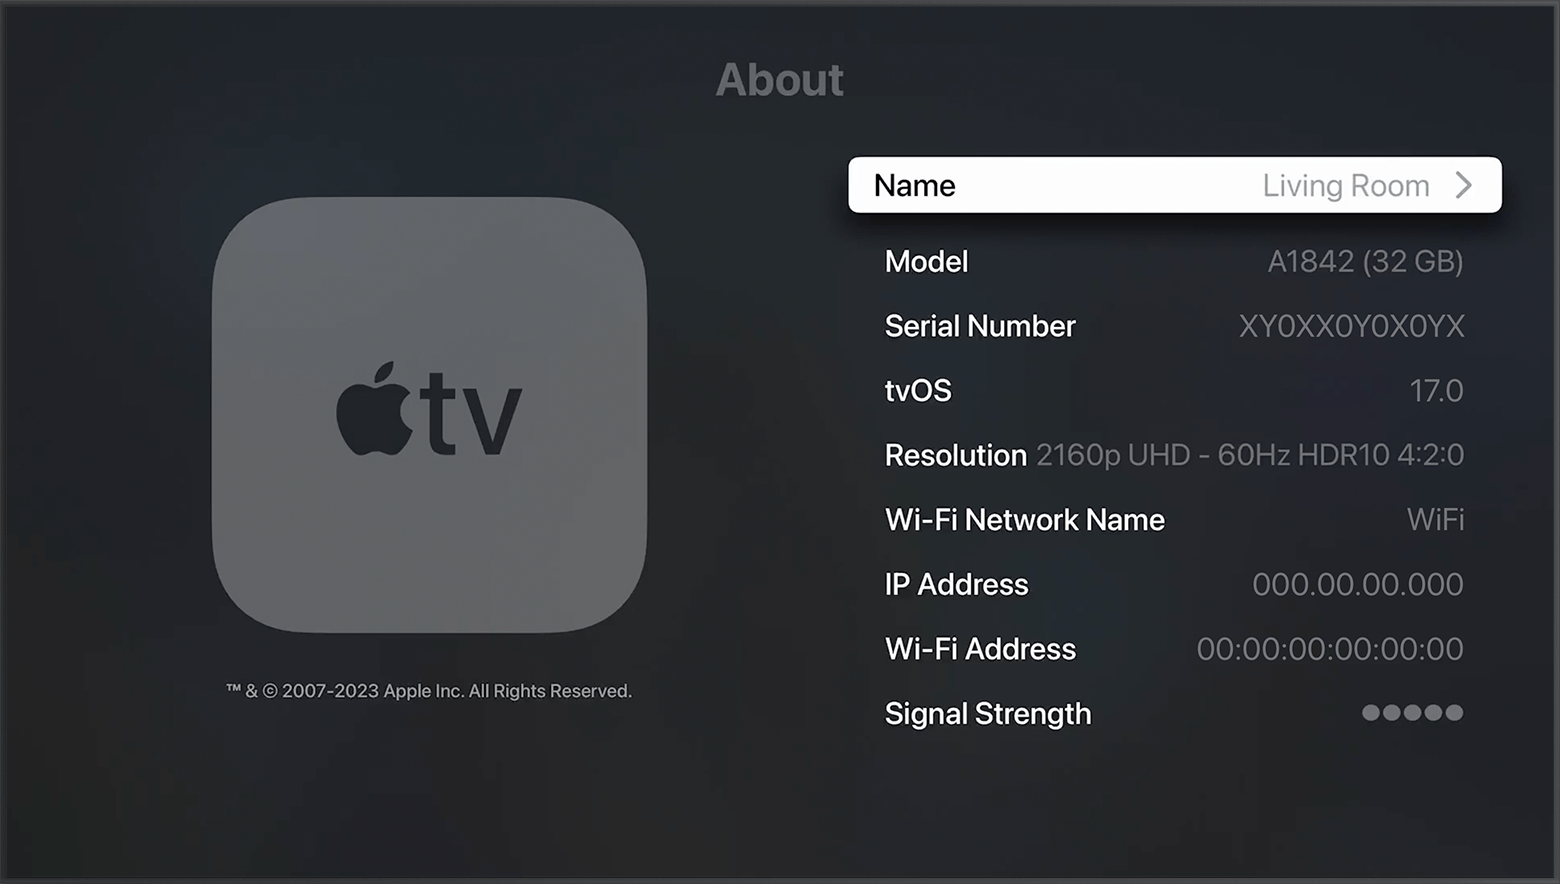 Serial Number appears near the top of the About screen on Apple TV